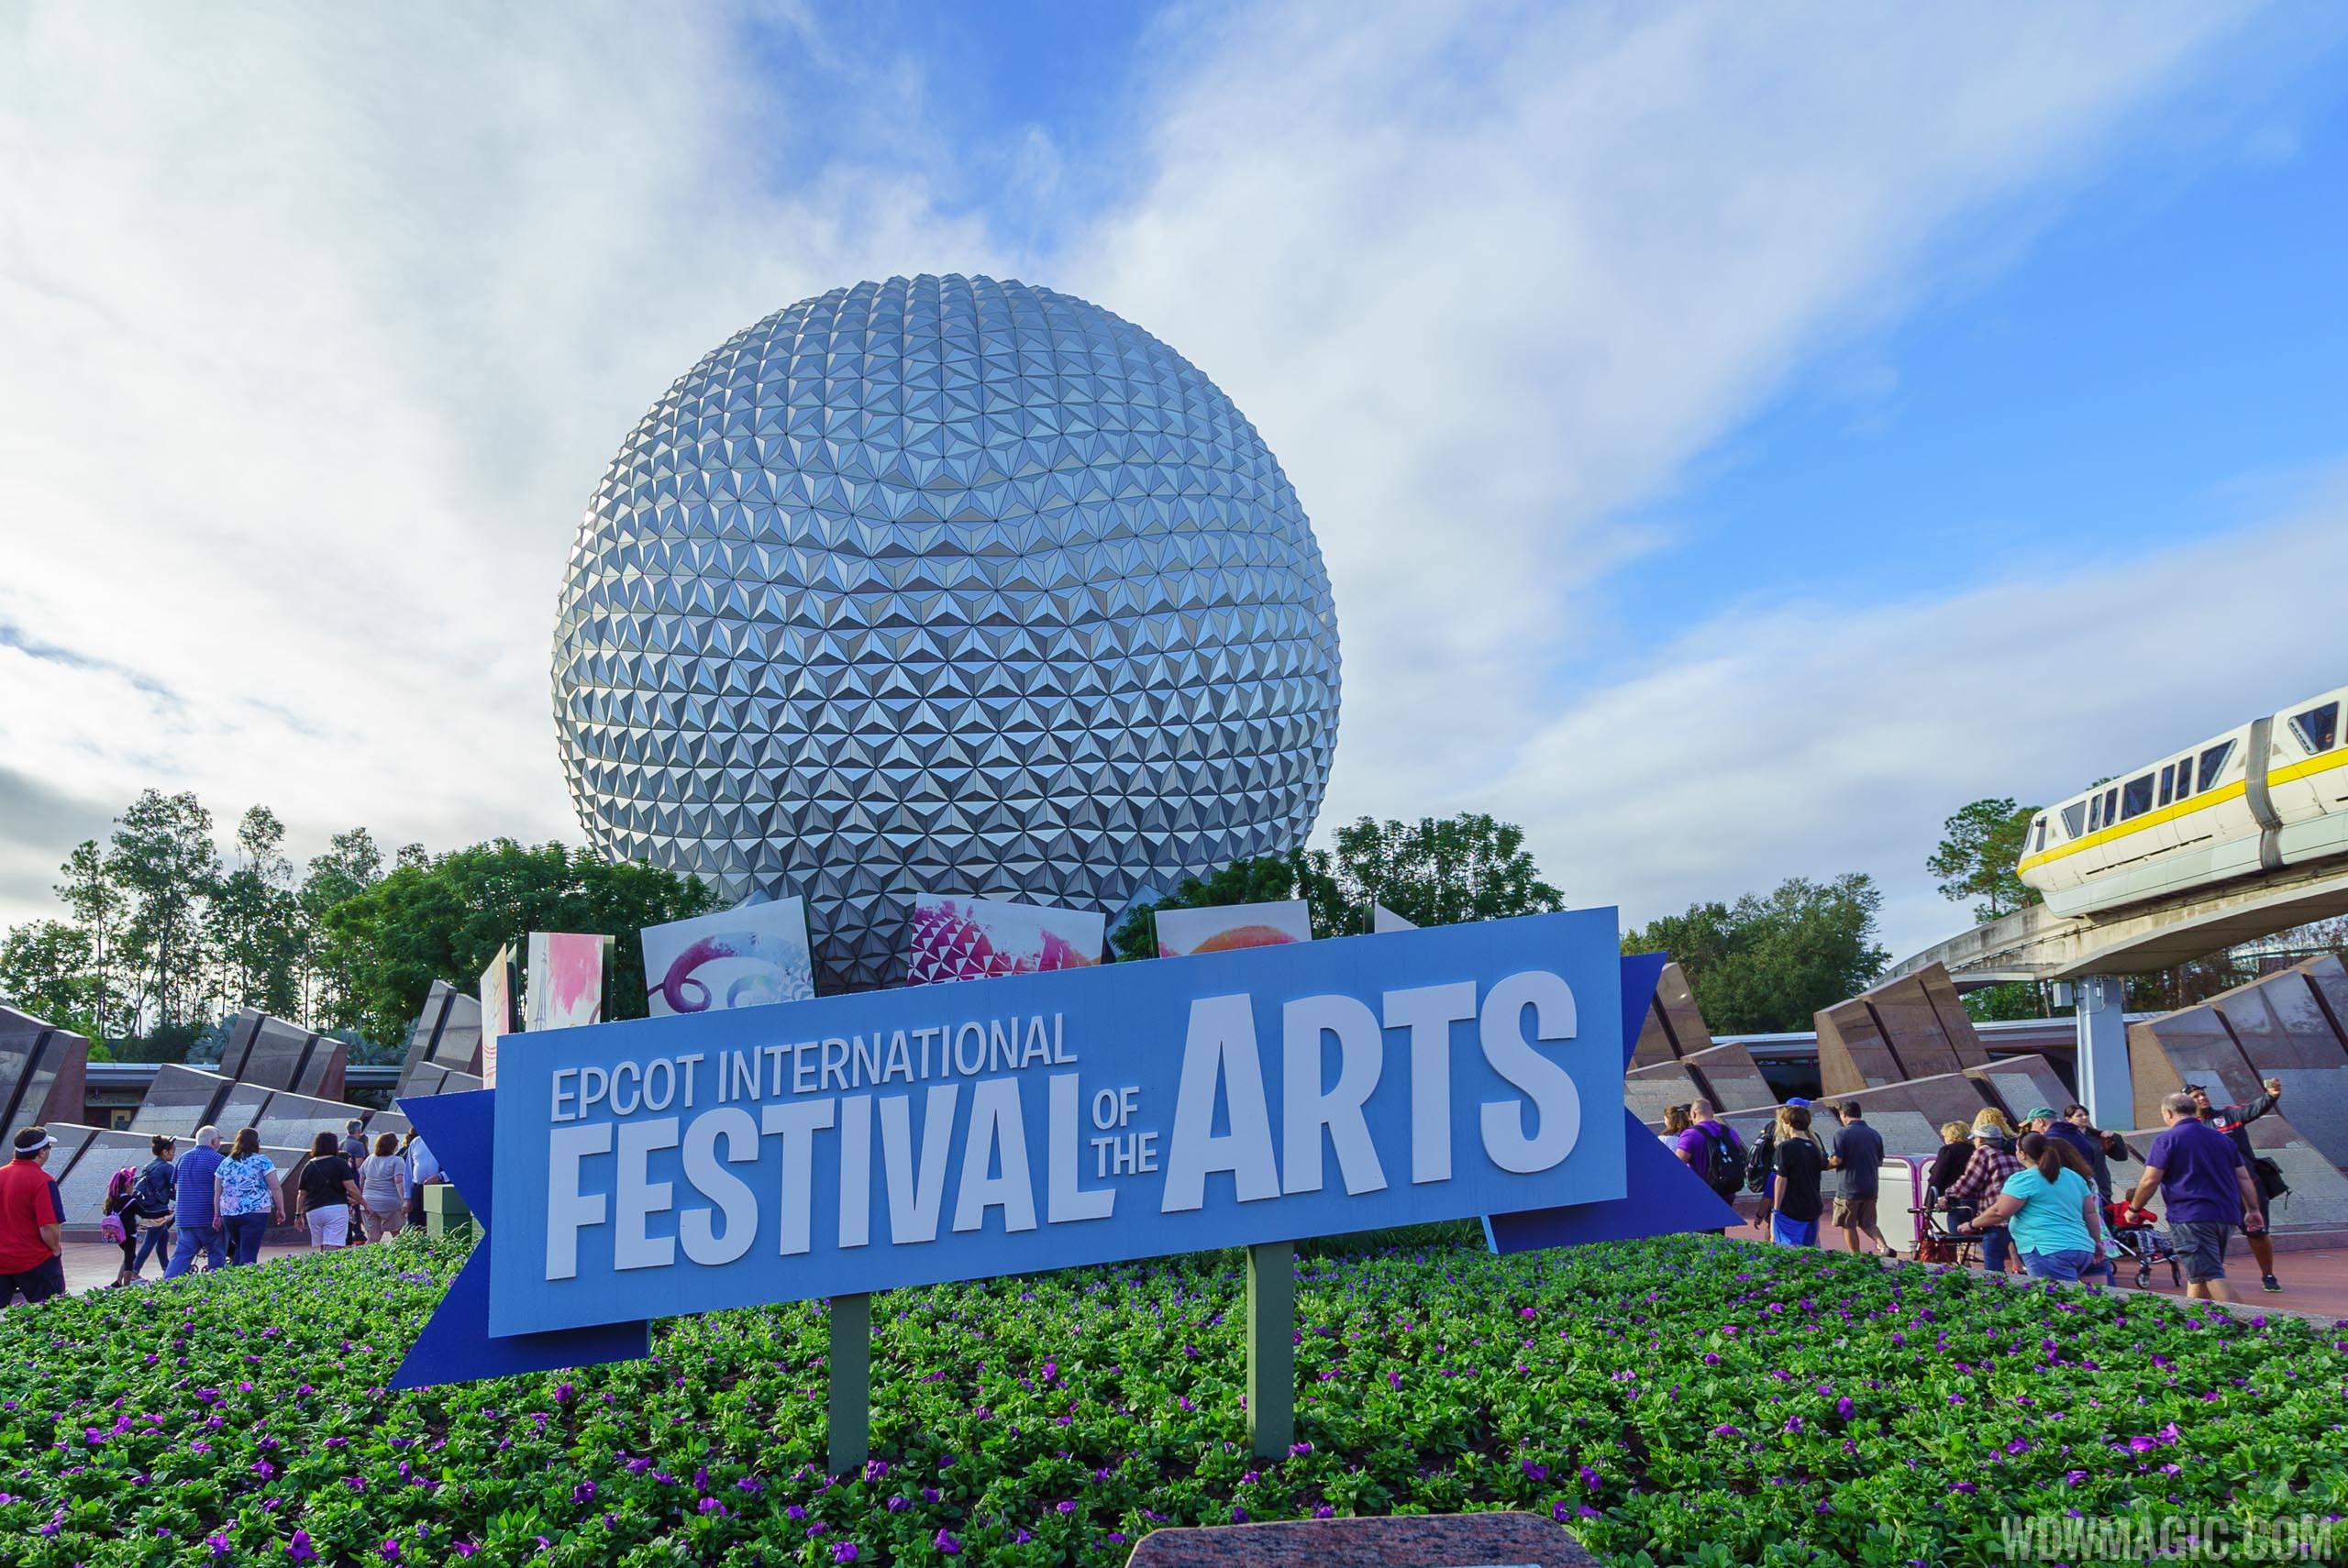 More details announced for the 2022 EPCOT International Festival of the Arts at Walt Disney World